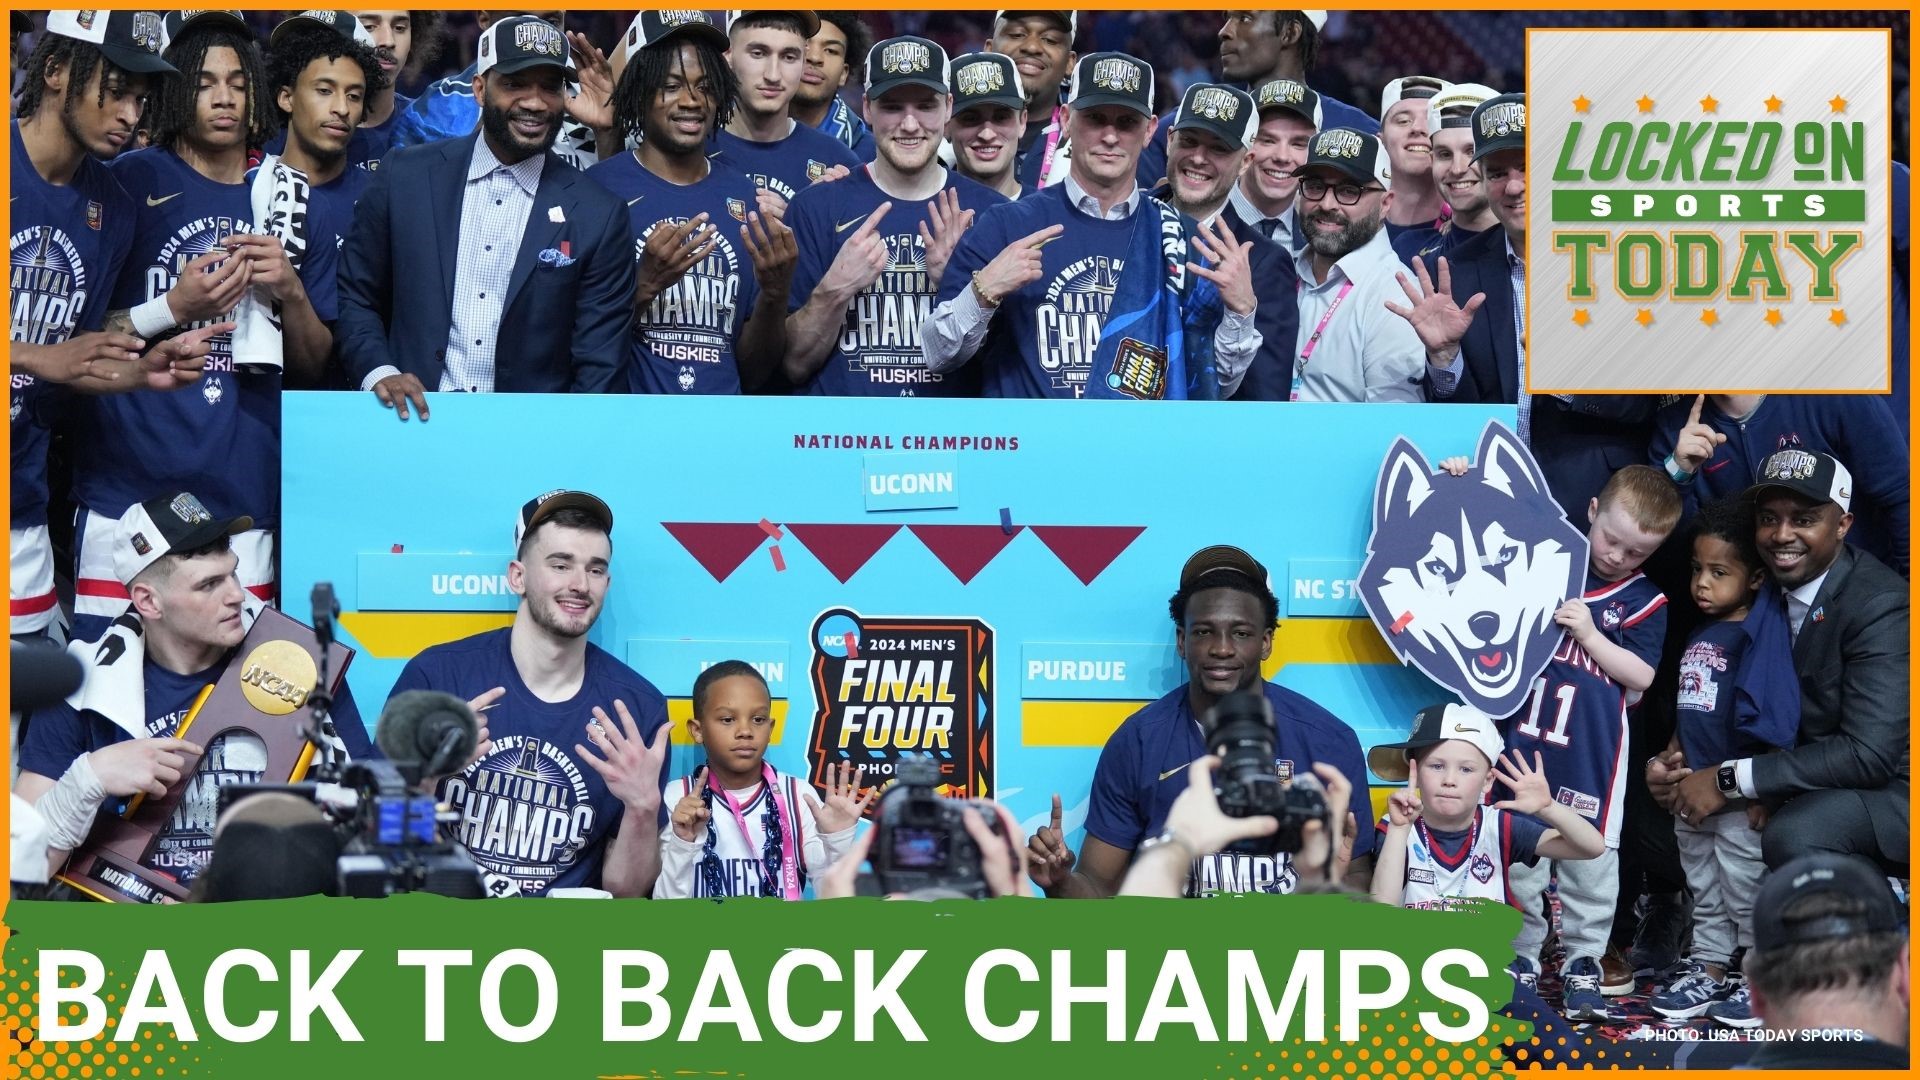 Discussing the day's top sports stories from UConn winning  the NCAA's men's basketball tournament to possible transfer rules changing in the NCAA.